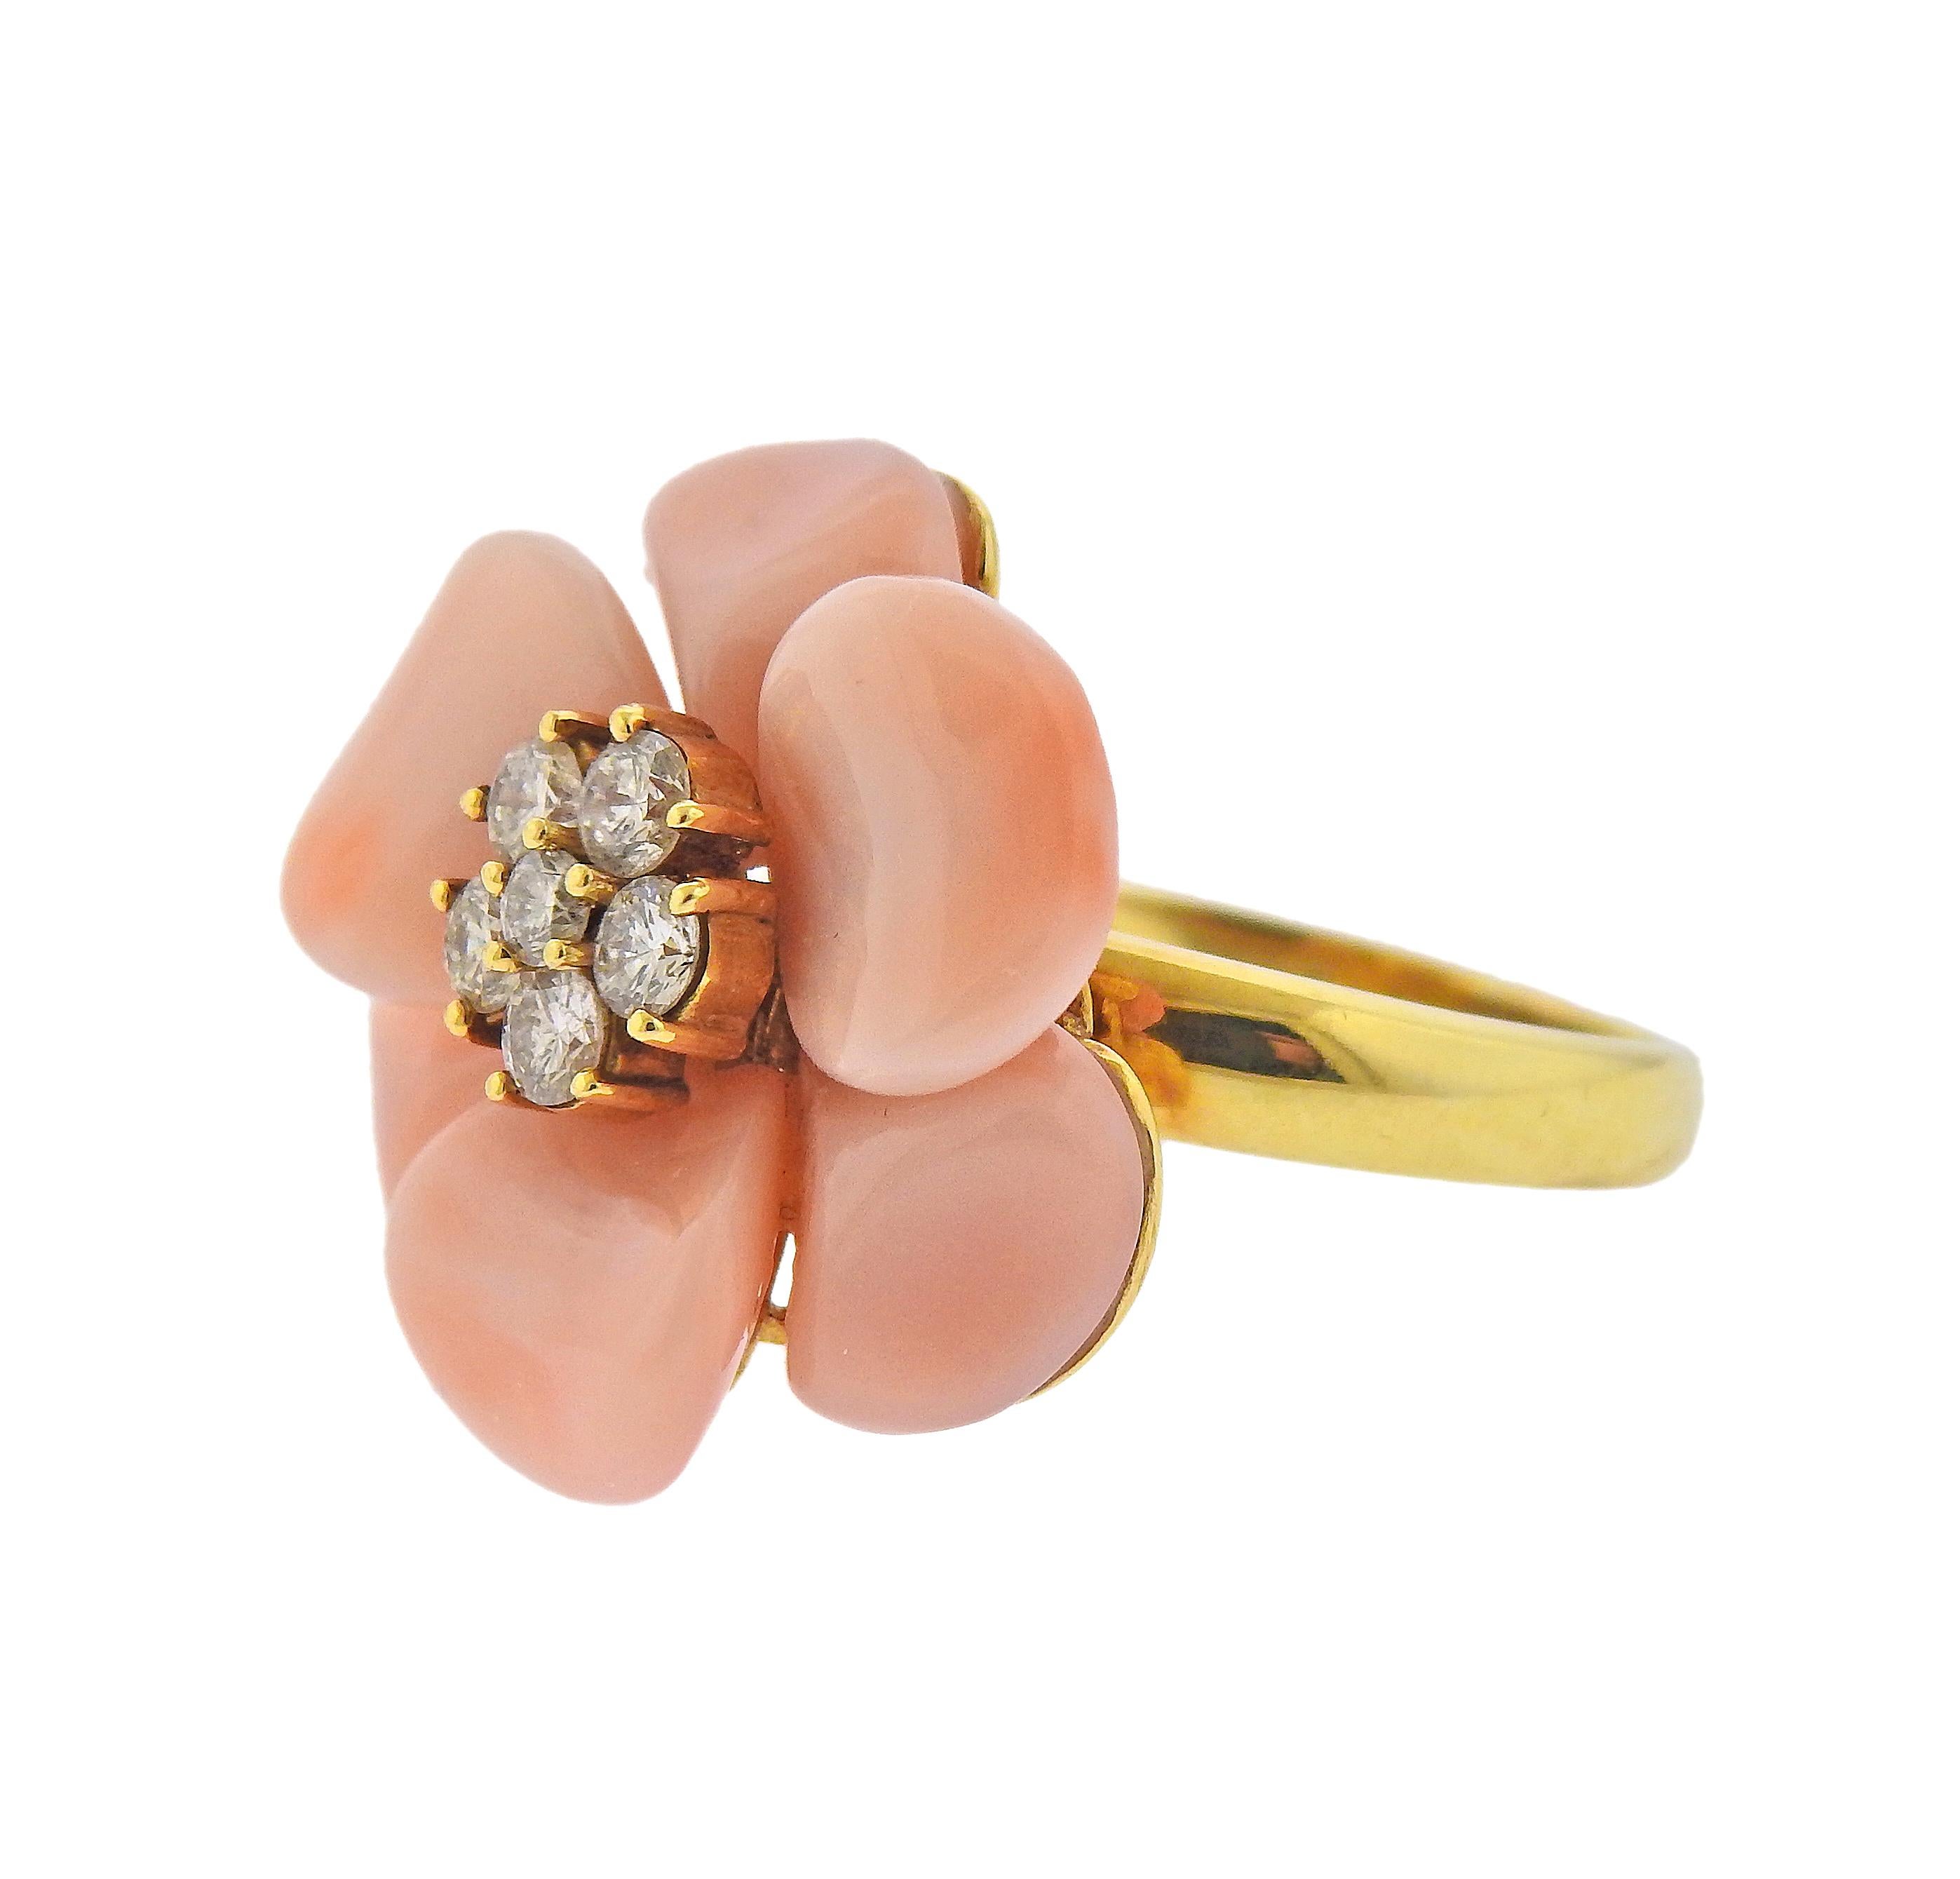 18k yellow gold flower ring, with coral petals and 0.56ctw in diamonds. Ring size - 7, ring top - 24mm x 22mm. Marked: 750, D056, k18. Weight - 10.7 grams. 